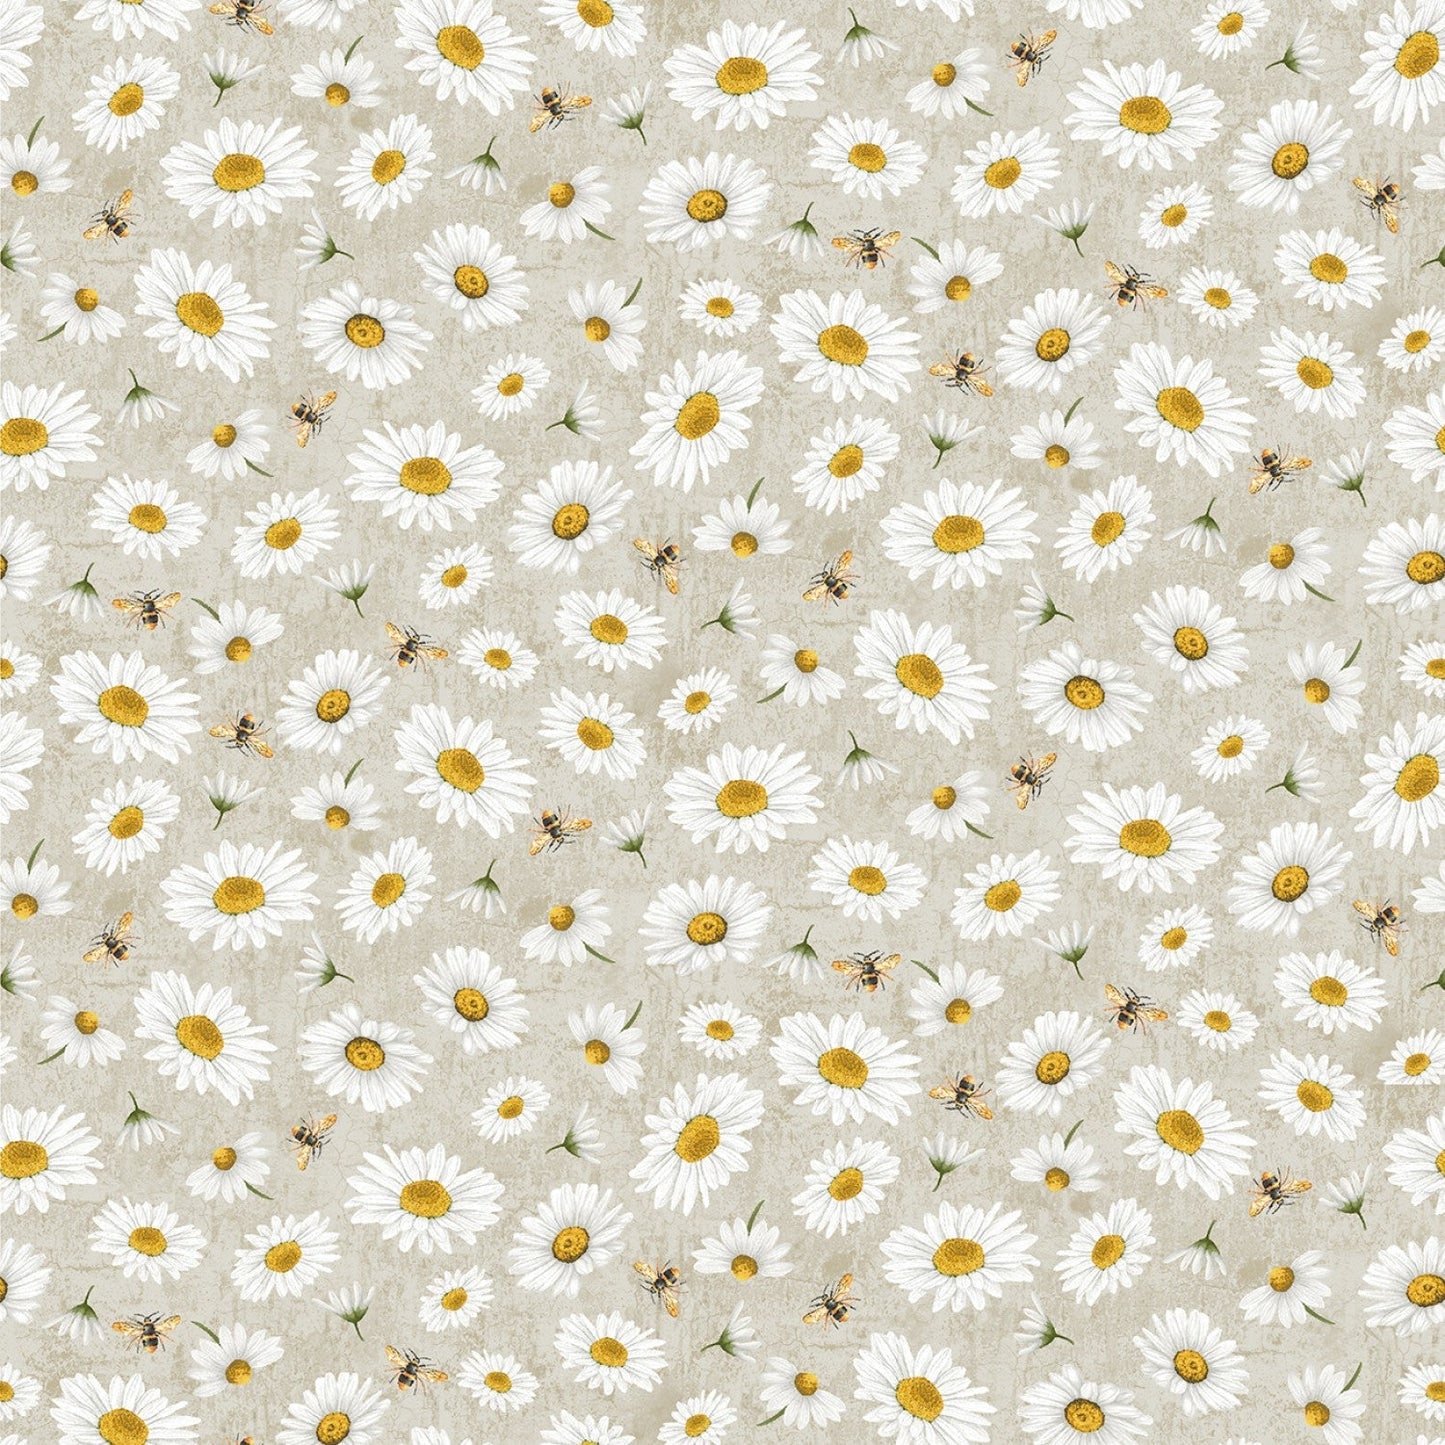 Timeless Treasures Fabric FQ (approximately 18" x 22") Tossed Bee and Daisy Florals Cotton Quilting Fabric (Grey), Honey Bee Farm